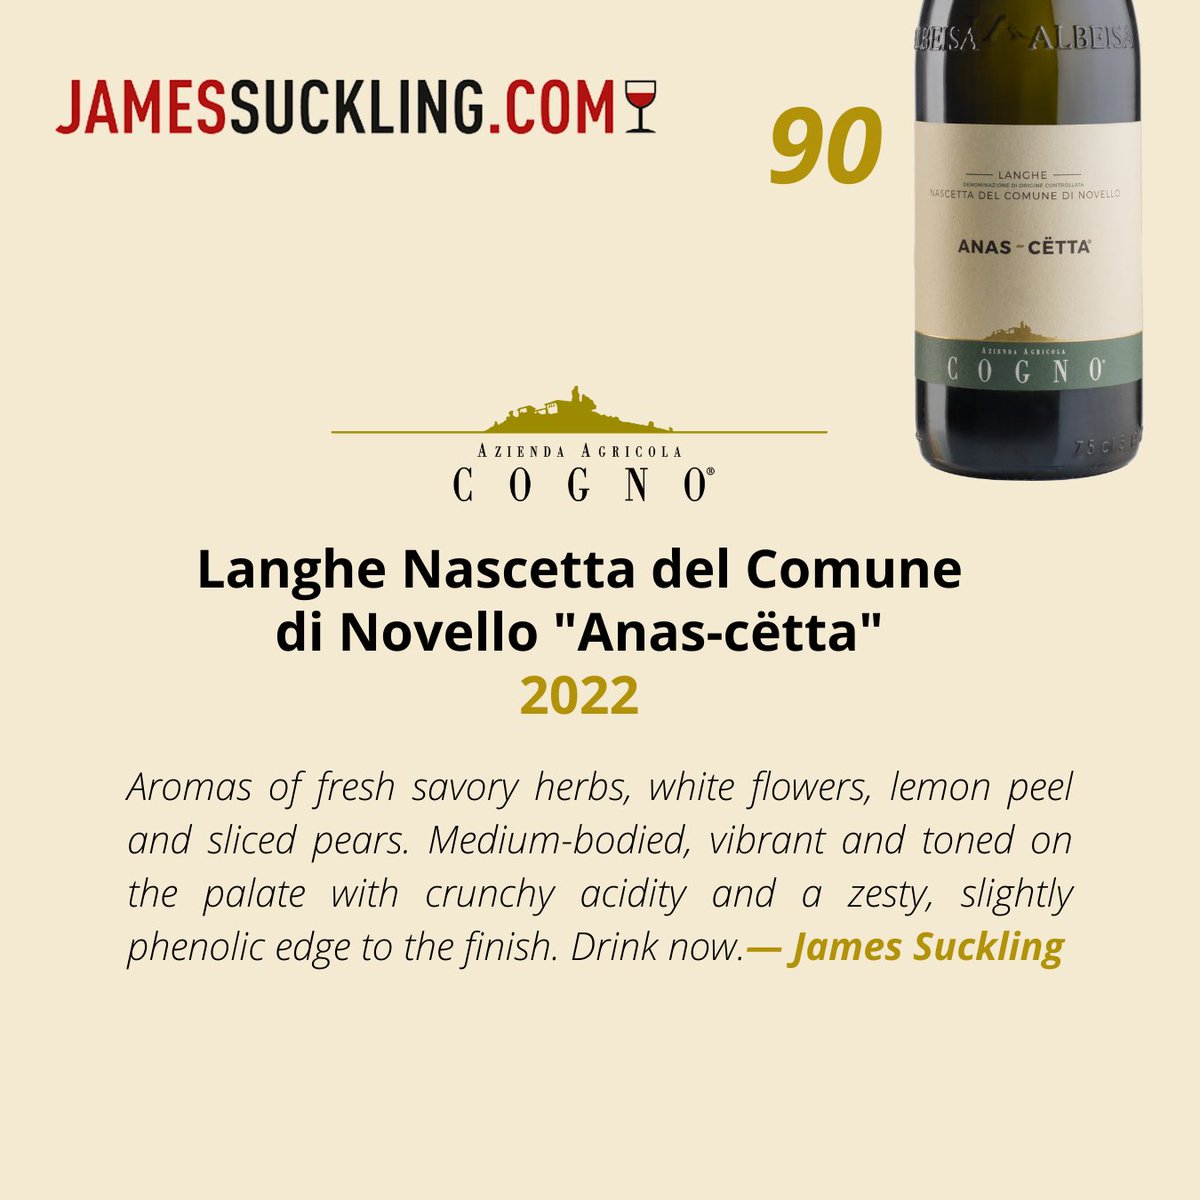 What a great satisfaction!

Thank you again to @JamesSuckling  for the beautiful reviews of our wines!

#jamessuckling #elviocogno #winereviews